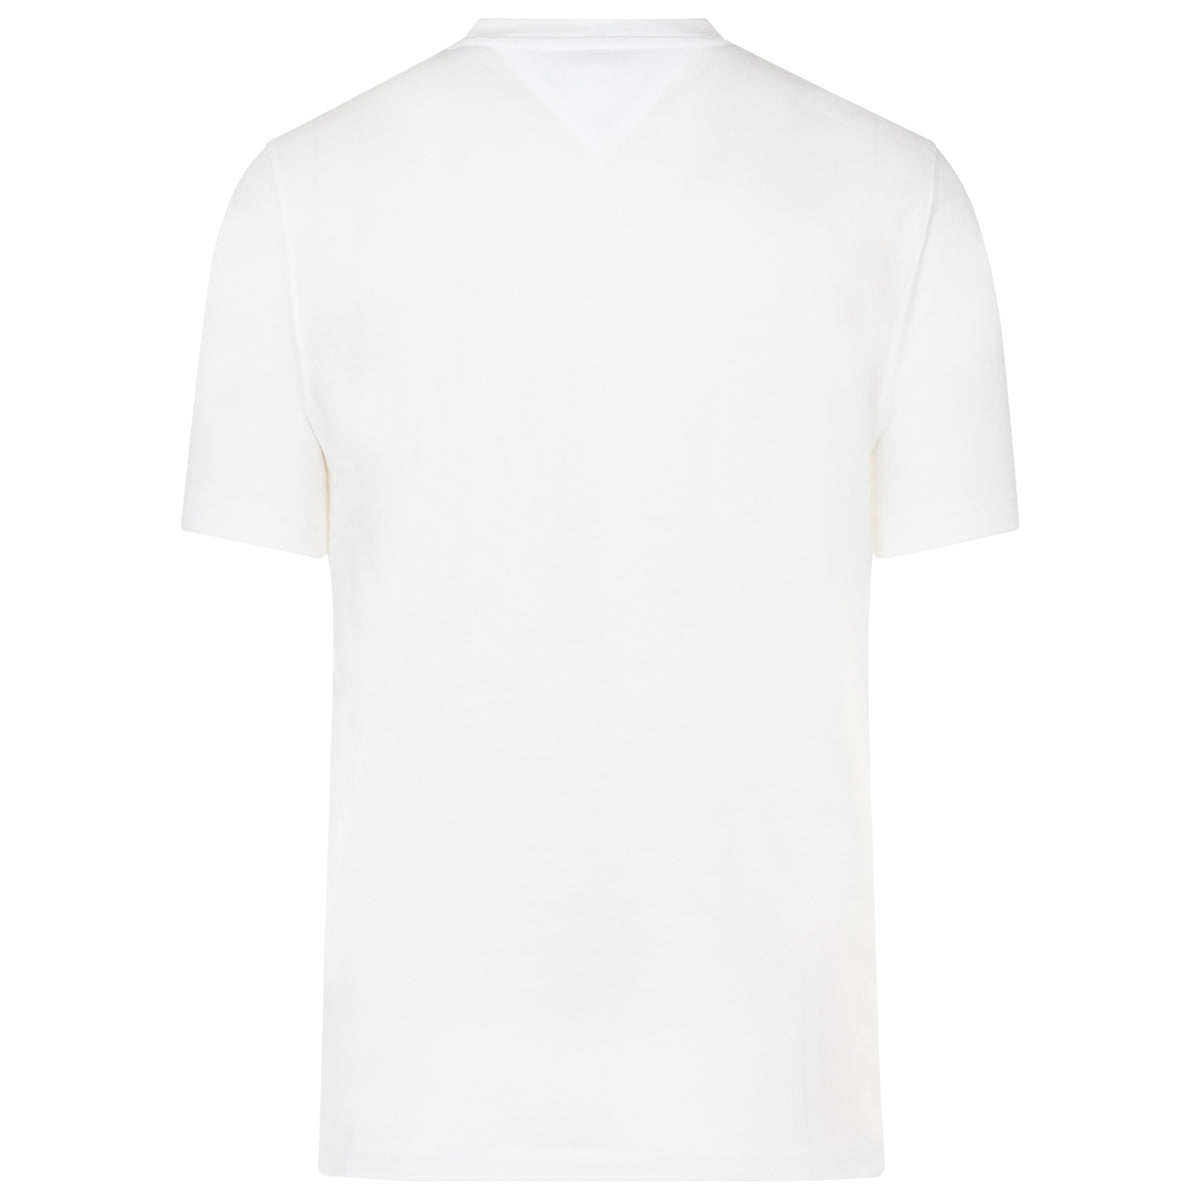 Load image into Gallery viewer, Tommy Hilfiger White Outline Linear Flag Tee
